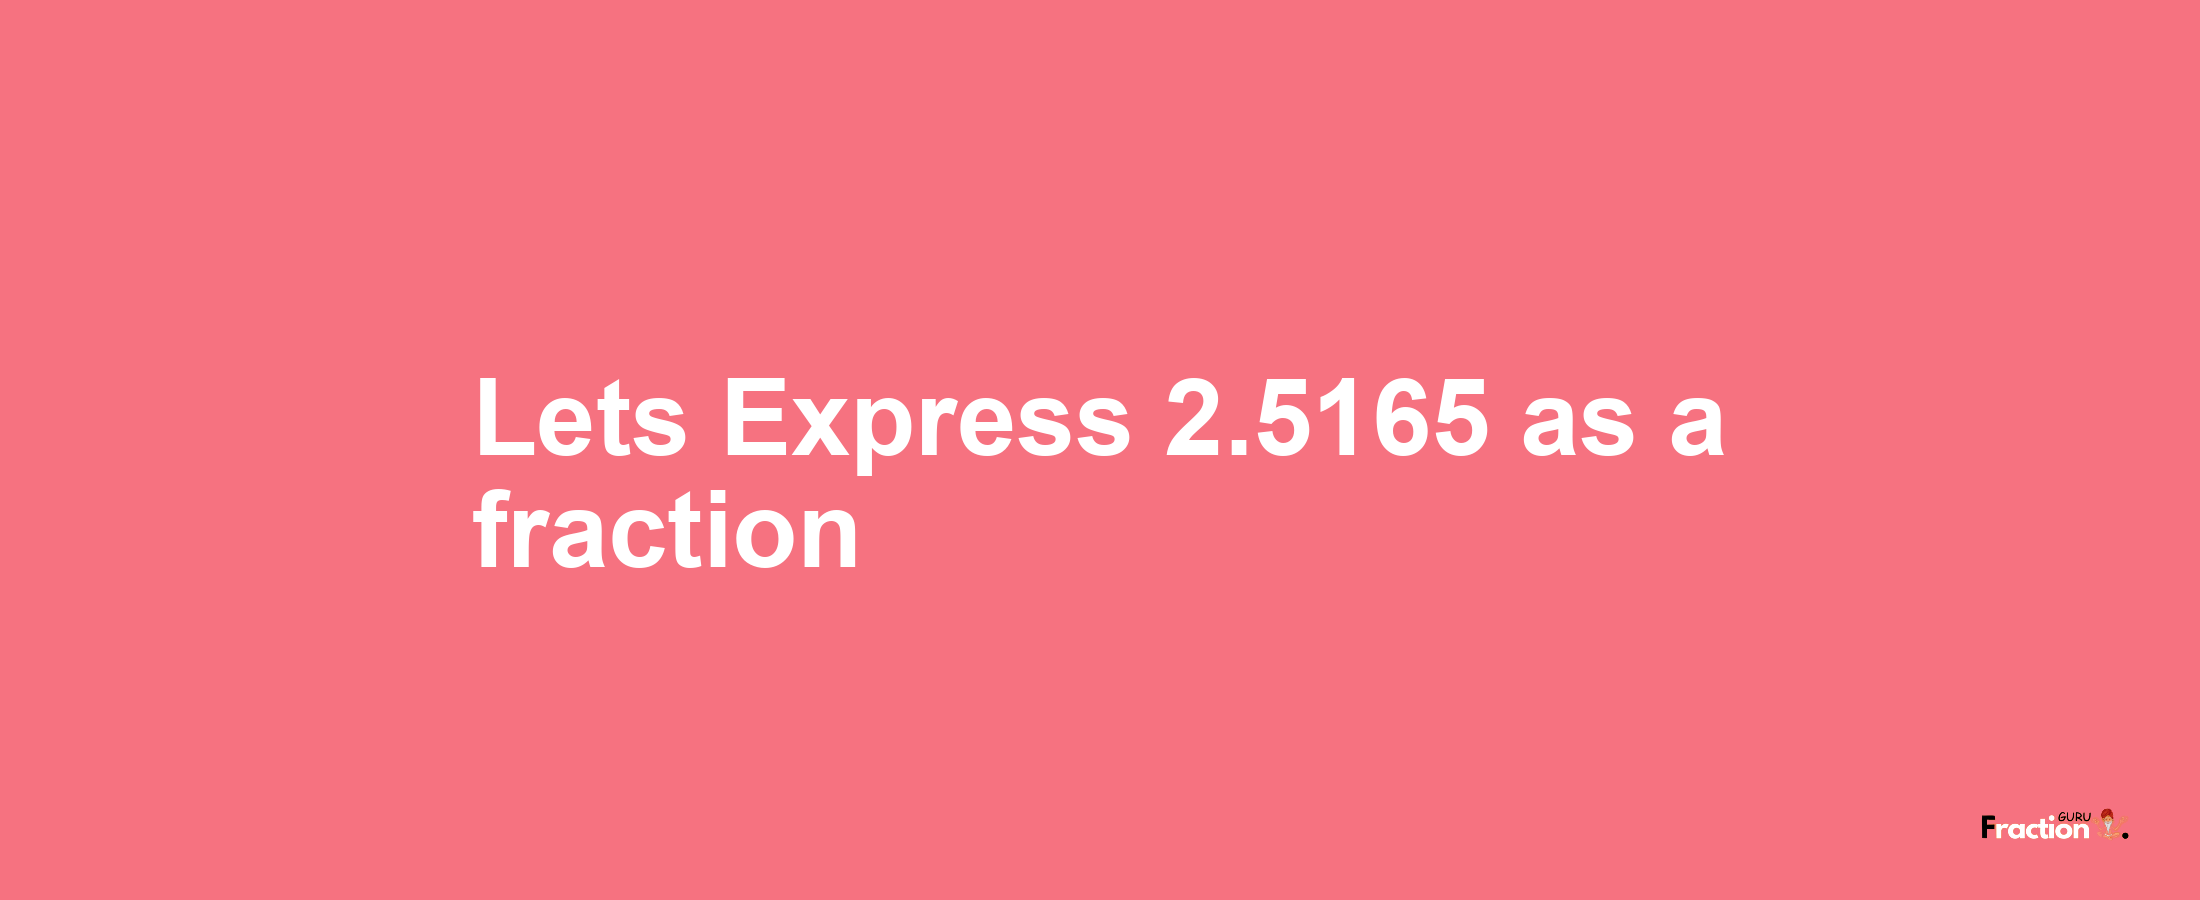 Lets Express 2.5165 as afraction